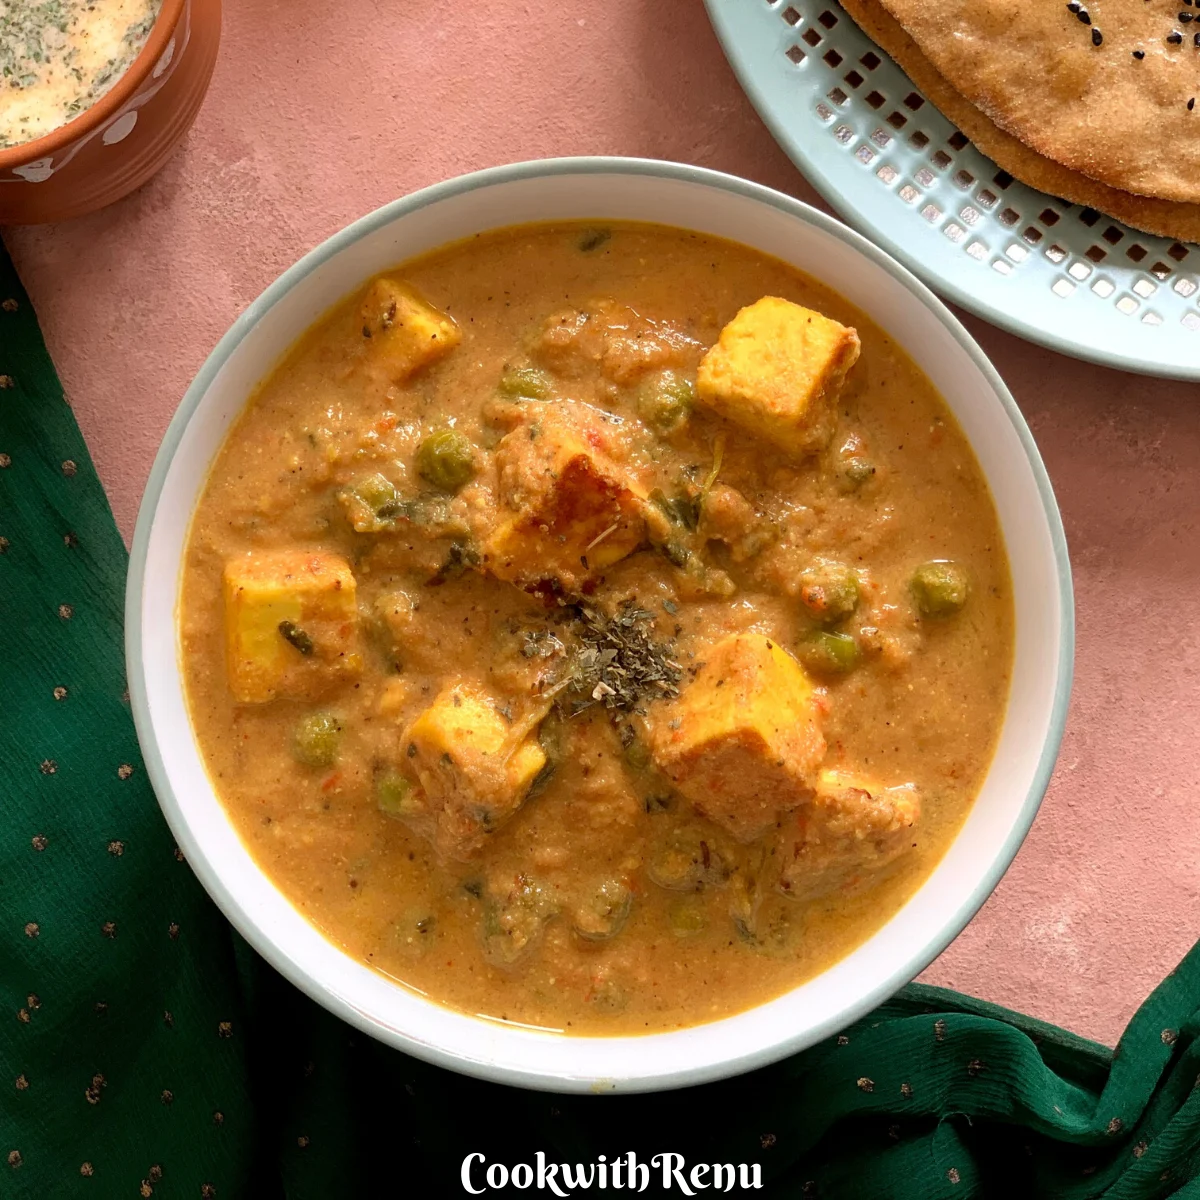 Methi Matar Paneer is a nutritious and healthy curry which uses fresh homegrown methi, matar (green peas) and home made paneer (cheese).